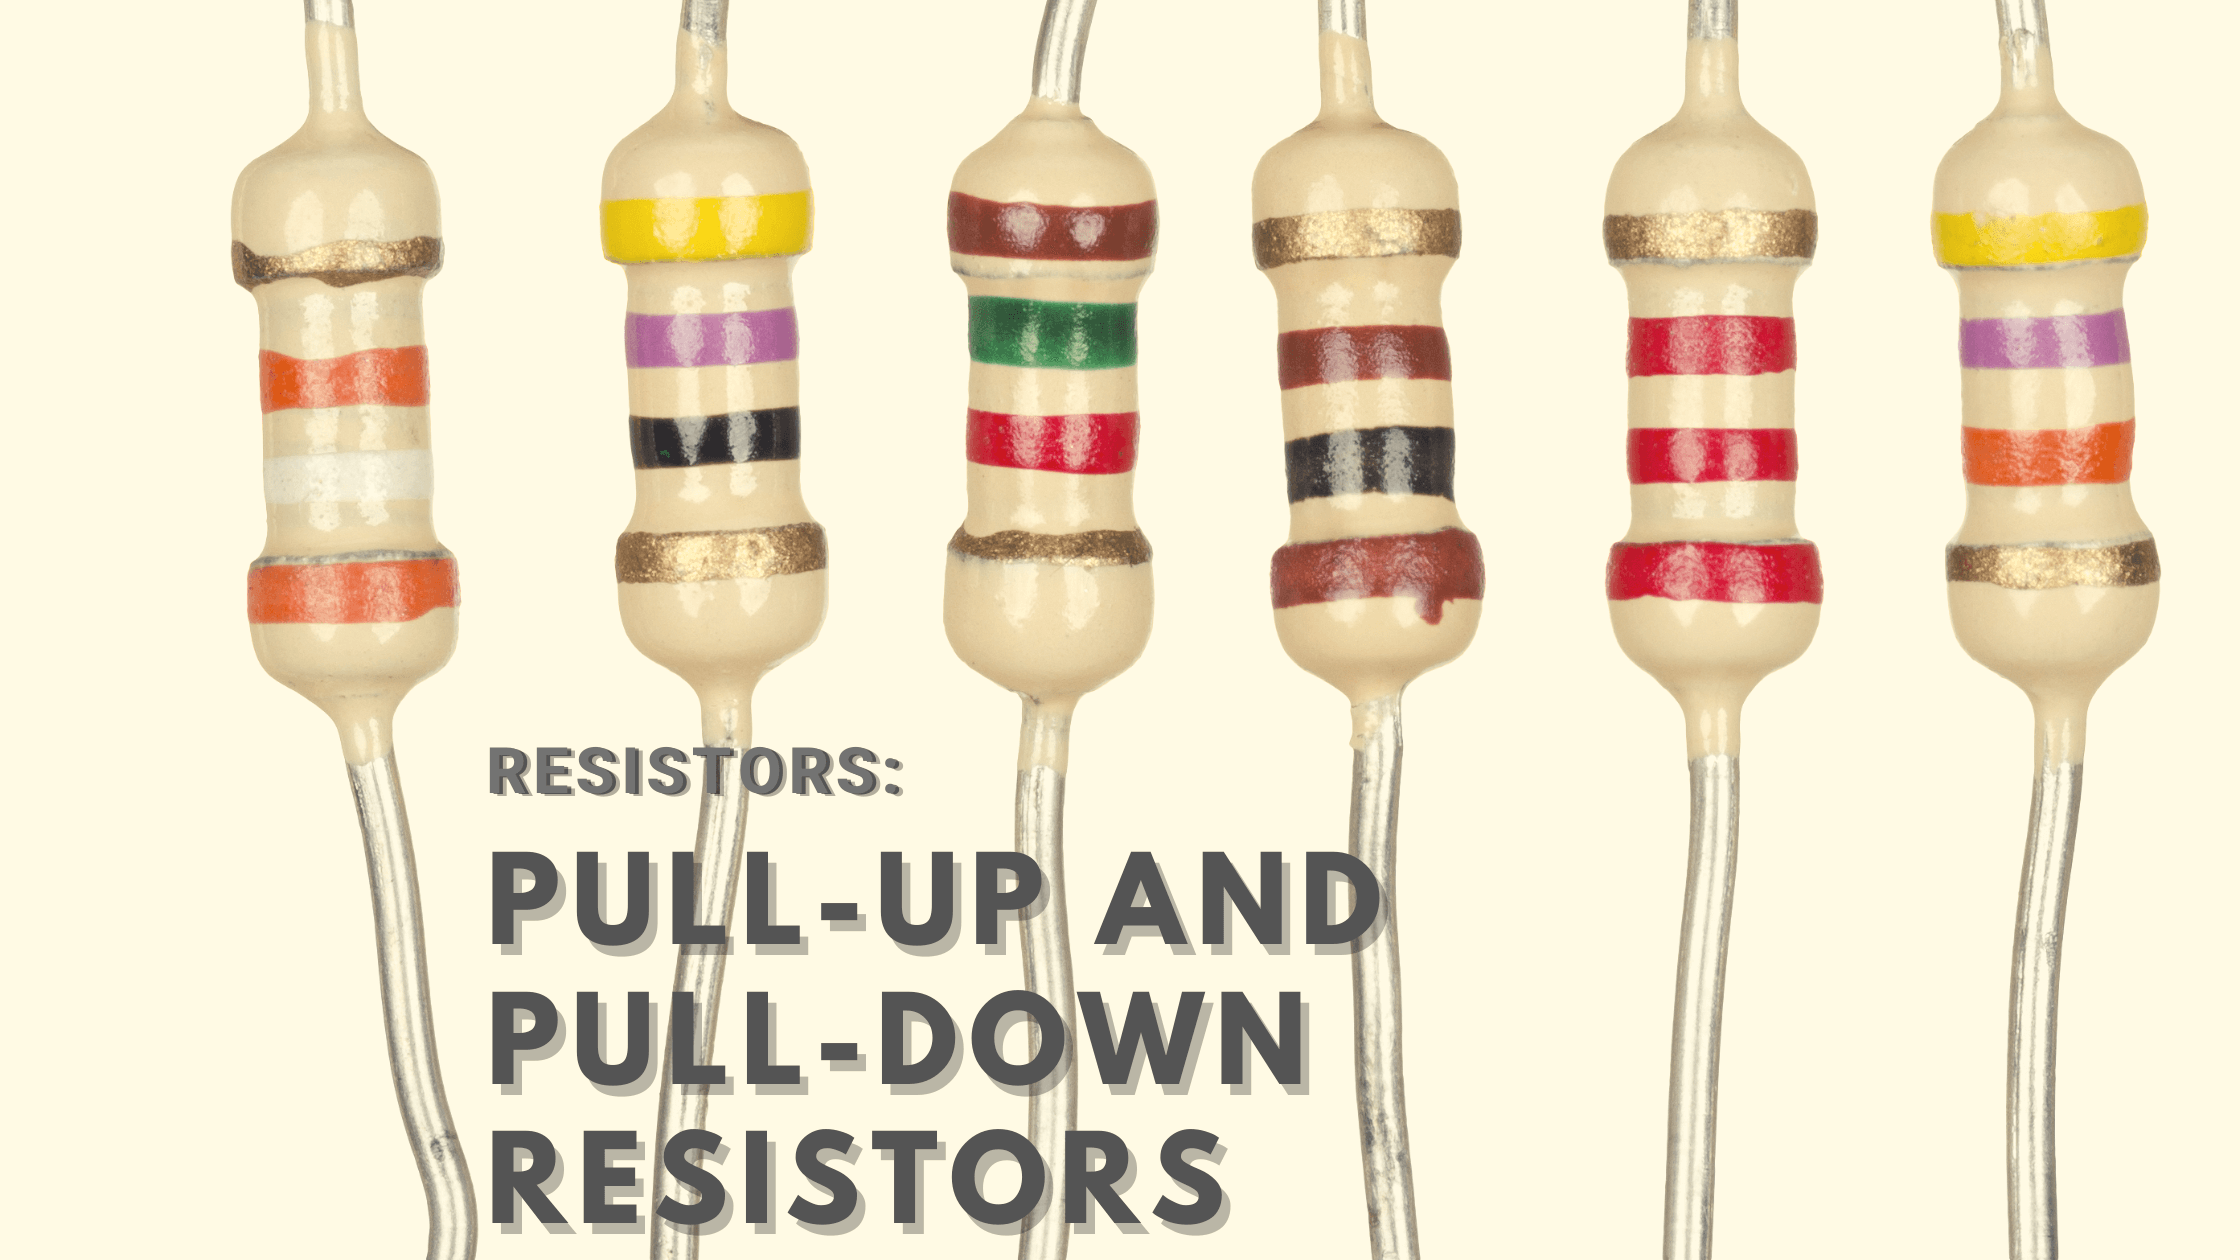 Resistors: Pull-up and pull-down resistors - Latest Open Tech From